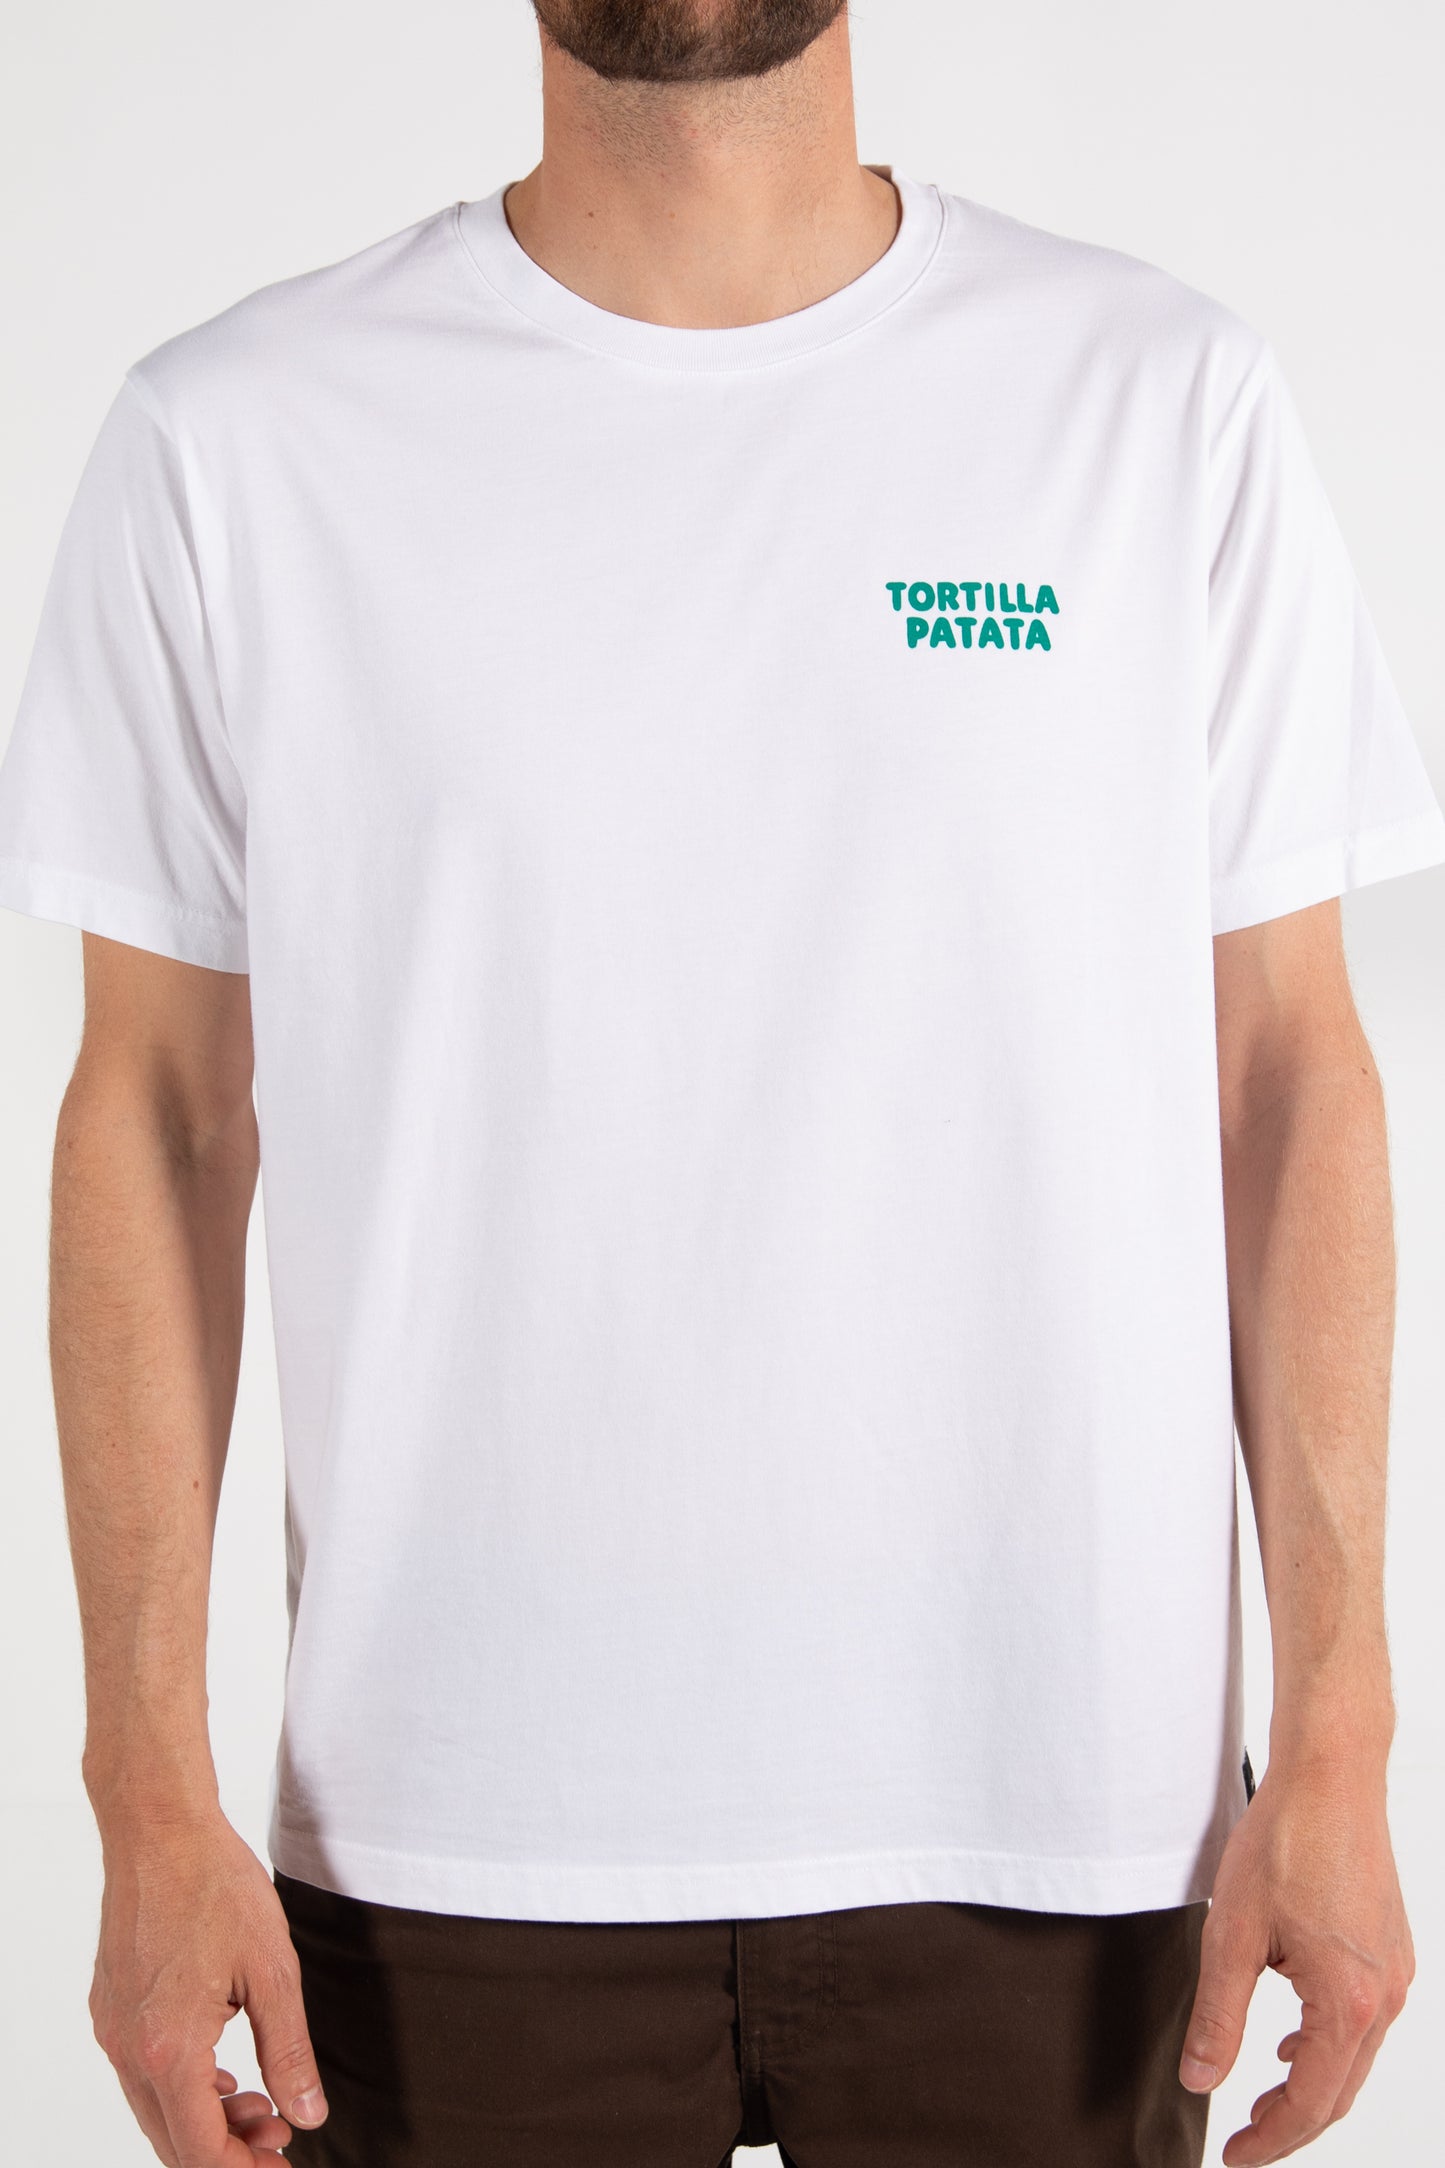 Pukas-Surf-Shop-Surfing-The-Basque-Country-Tortilla-tee-man-white